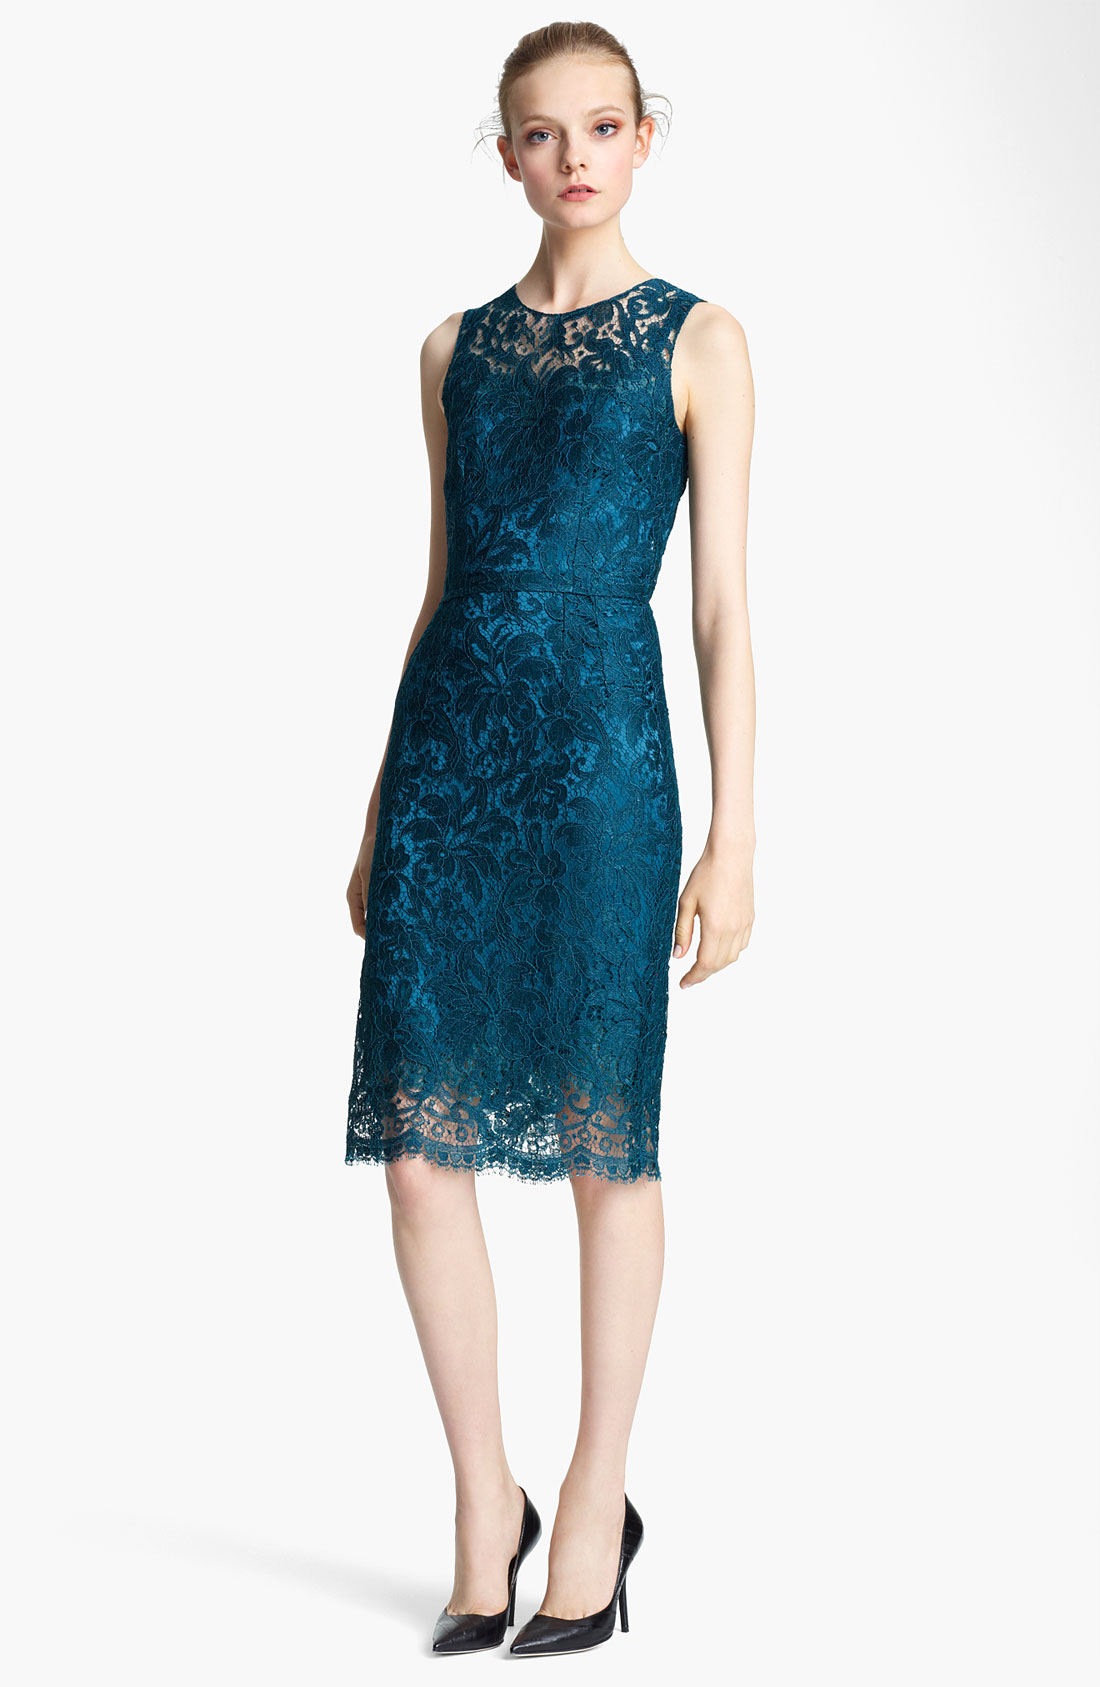 Dolce & gabbana Lace Pencil Dress in Blue (teal) | Lyst